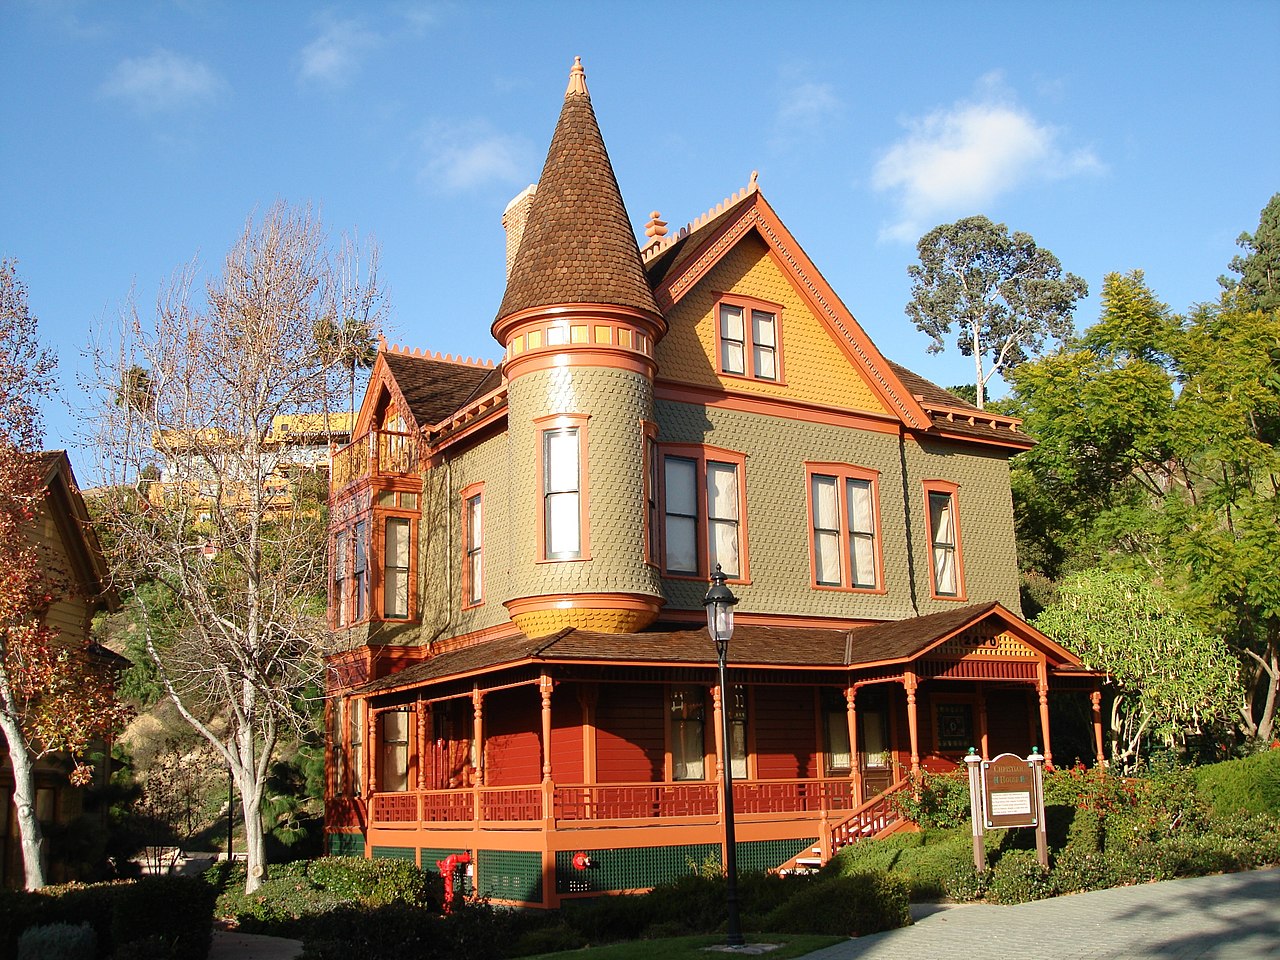 Historic Homes Remodeling and Design Company in San Diego